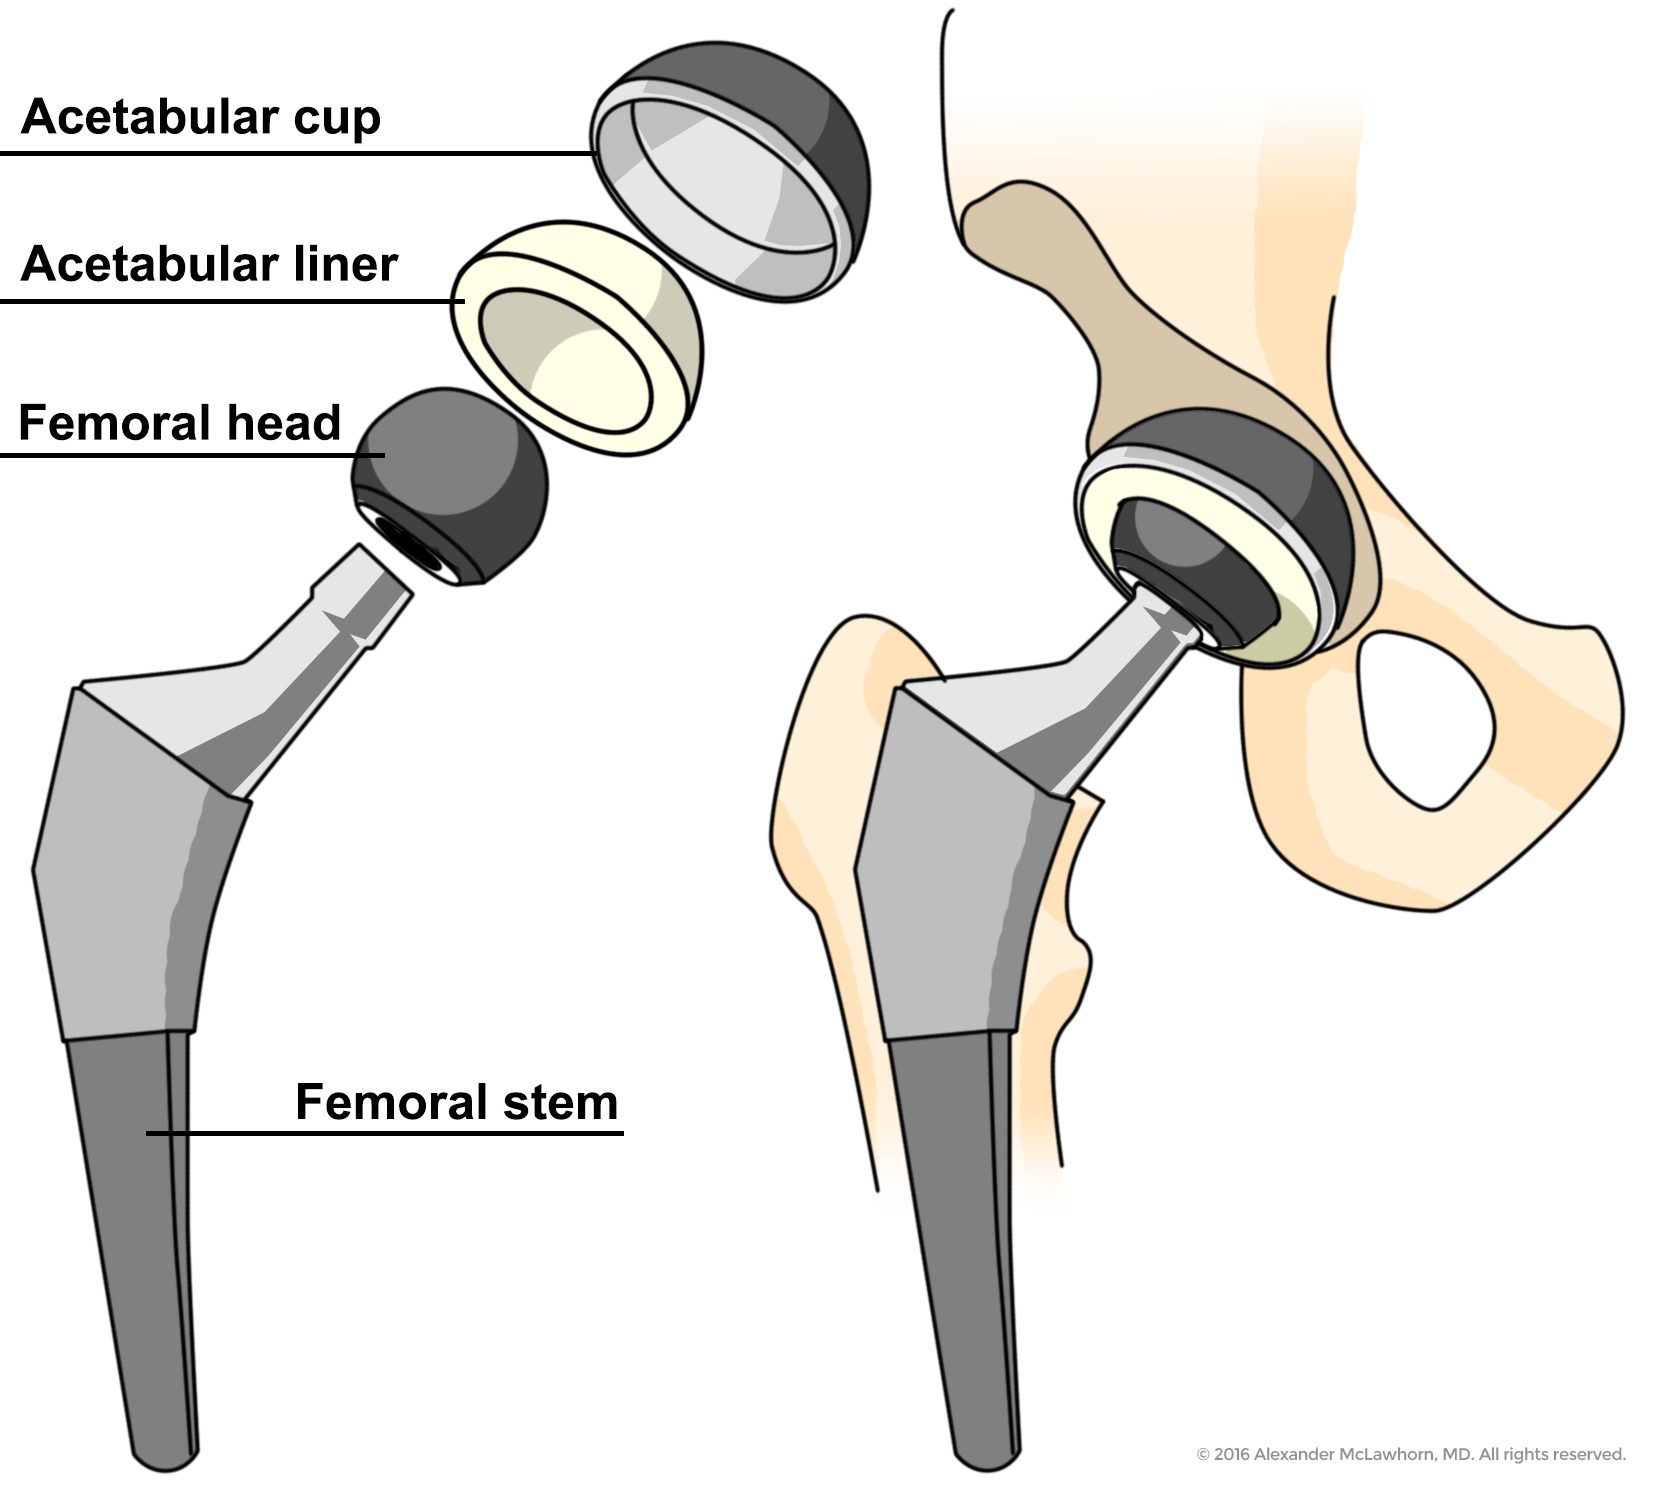 illustration of metal hip replacement parts, including femoral stem and head, as well as same metal replacement inserted into pelvic bone